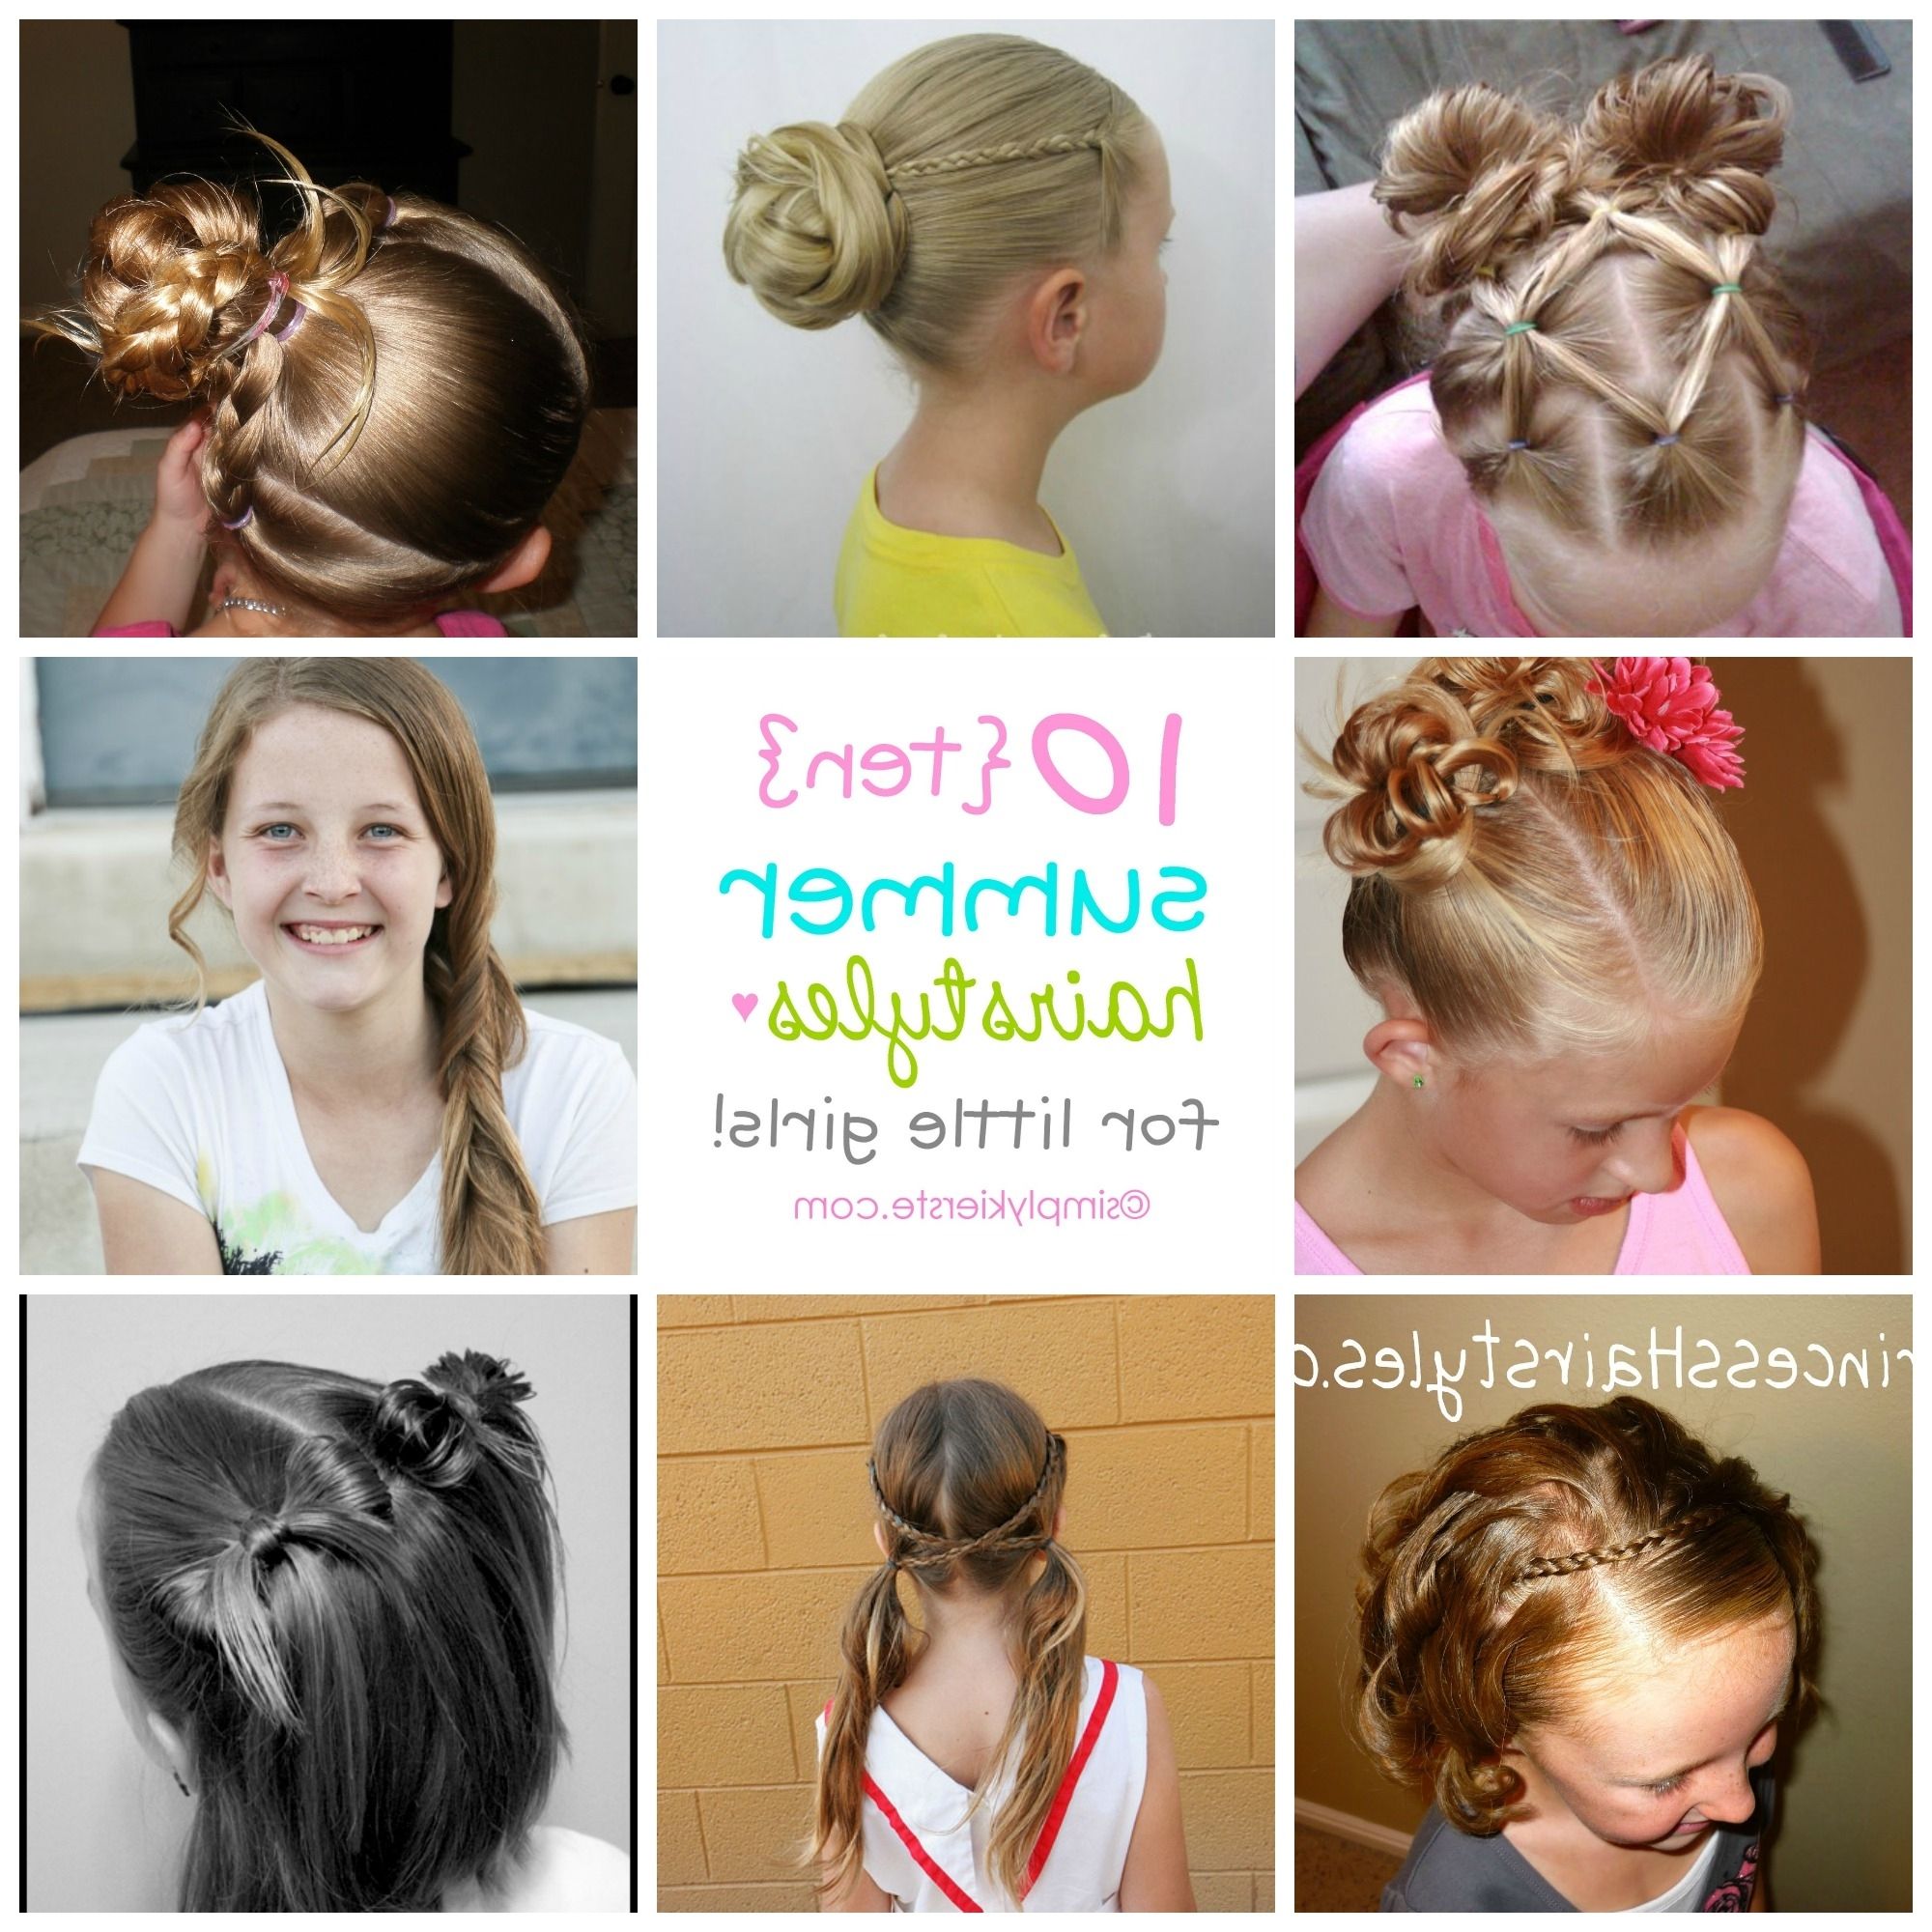 10 Fun Summer Hairstyles For Little Girls | Simplykierste For Little Girl Updos For Short Hair (View 2 of 15)